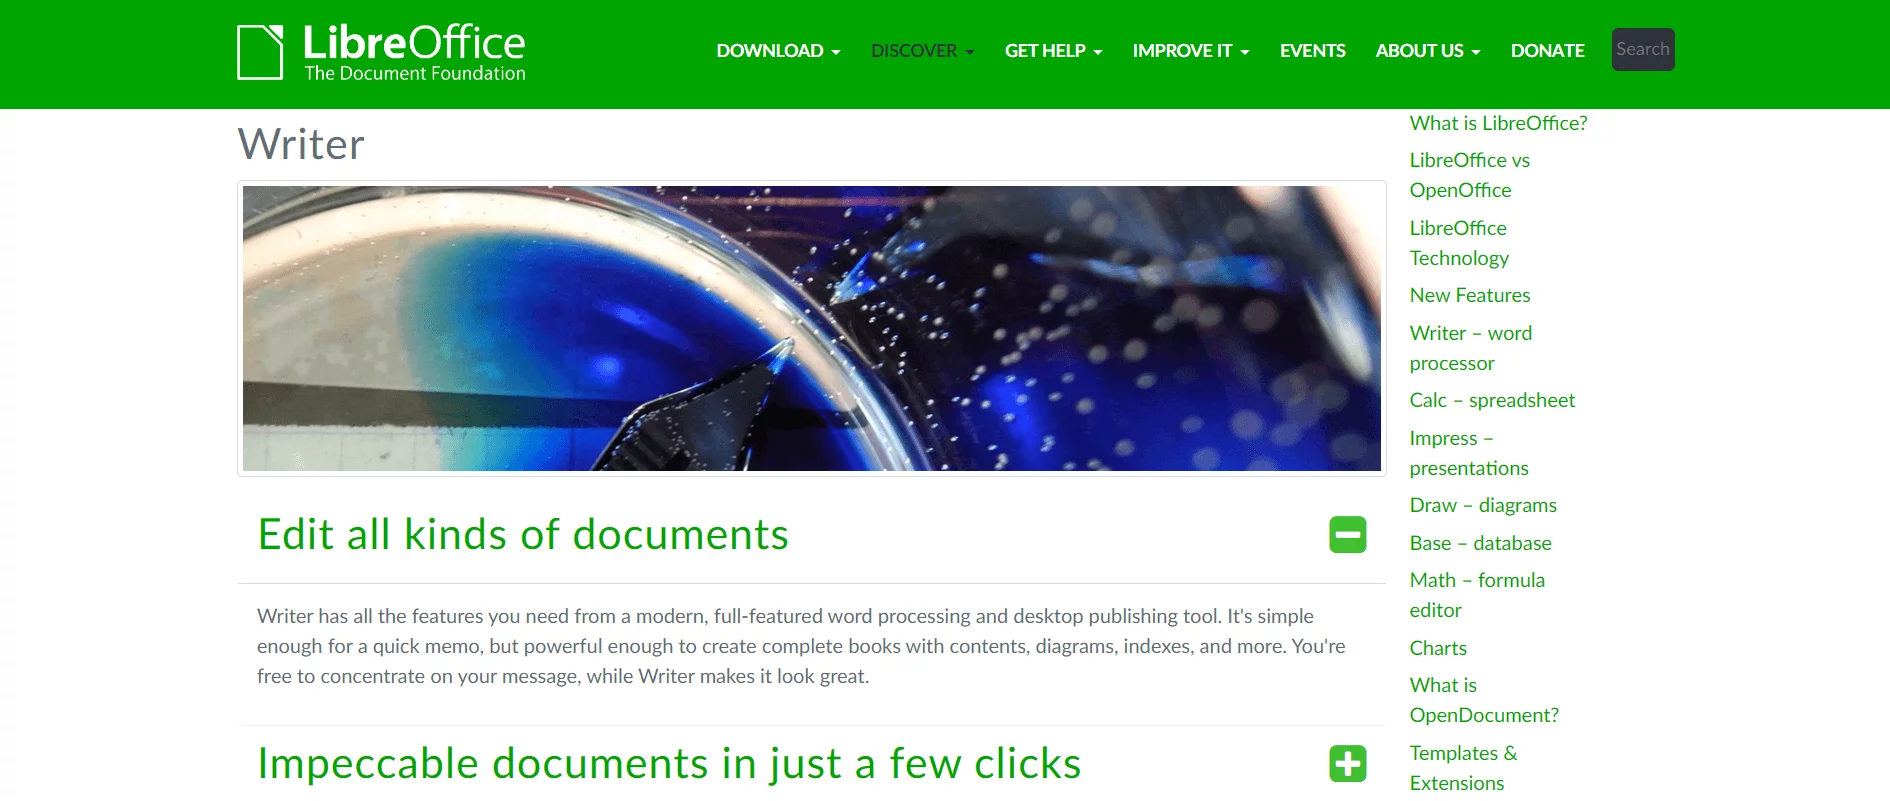 LibreOffice Writer homepage promoting features for editing various document types and creating professional-quality content easily.